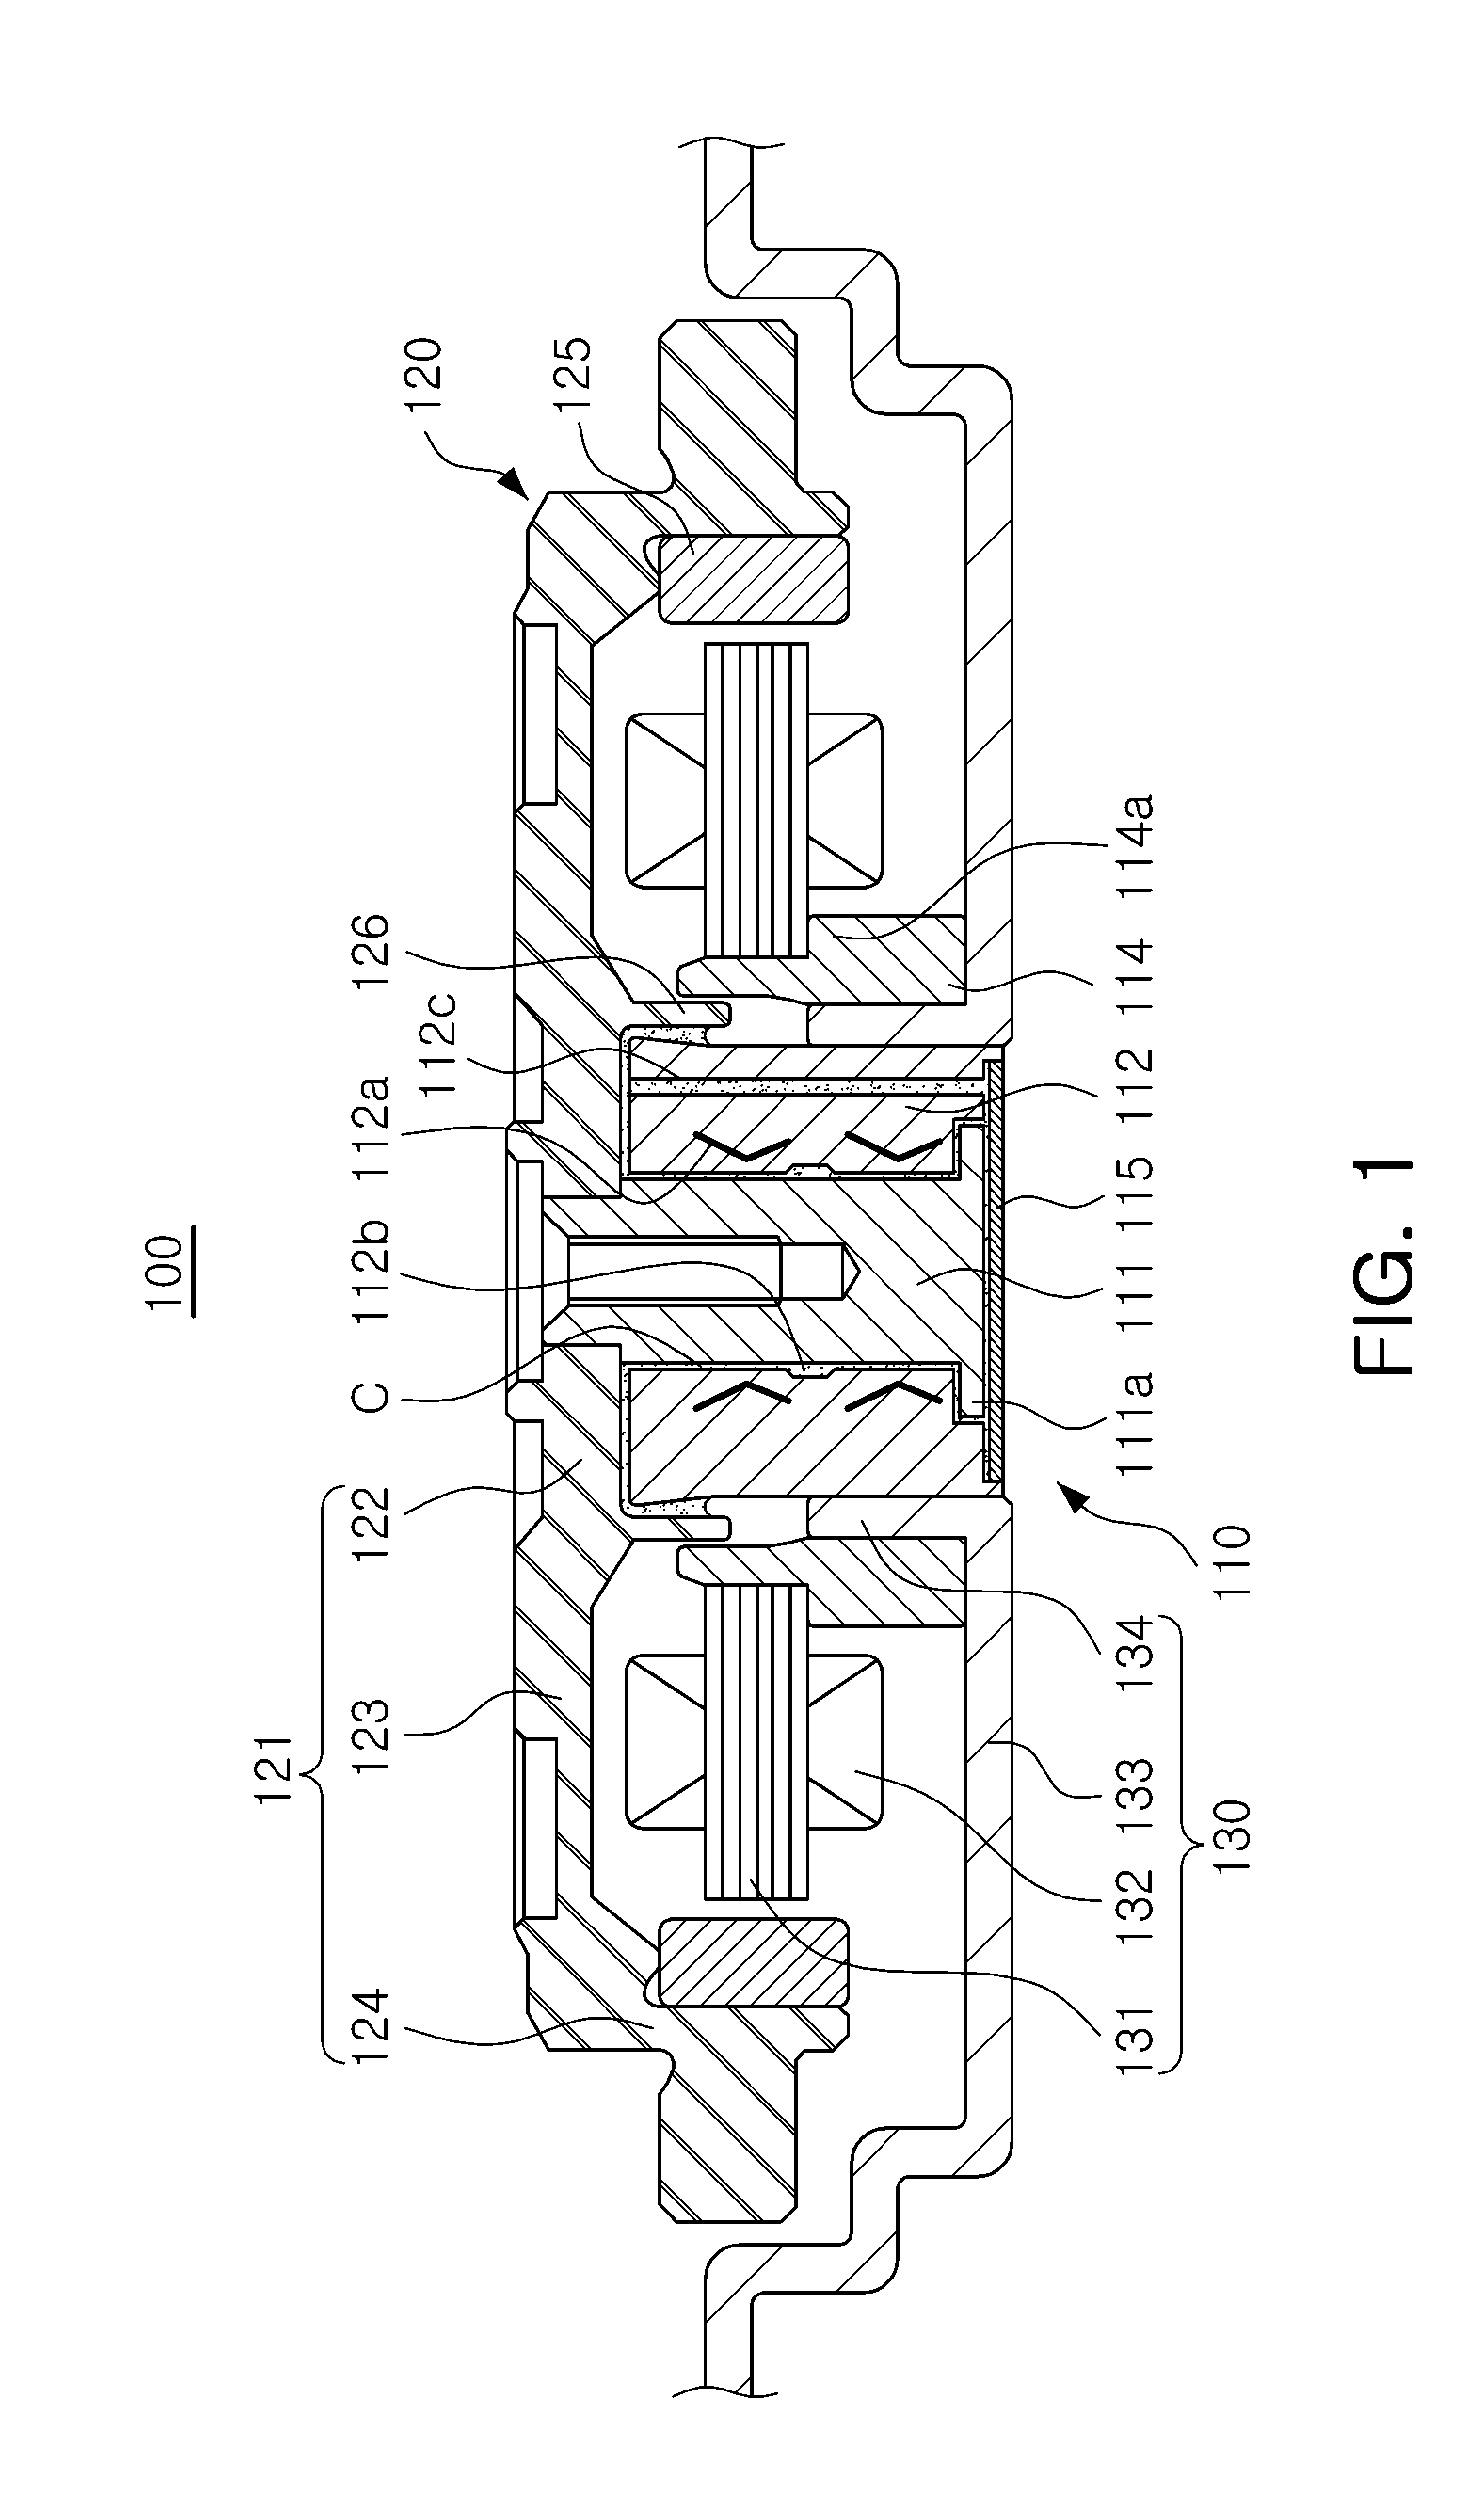 Spindle motor and hard disc drive including the same